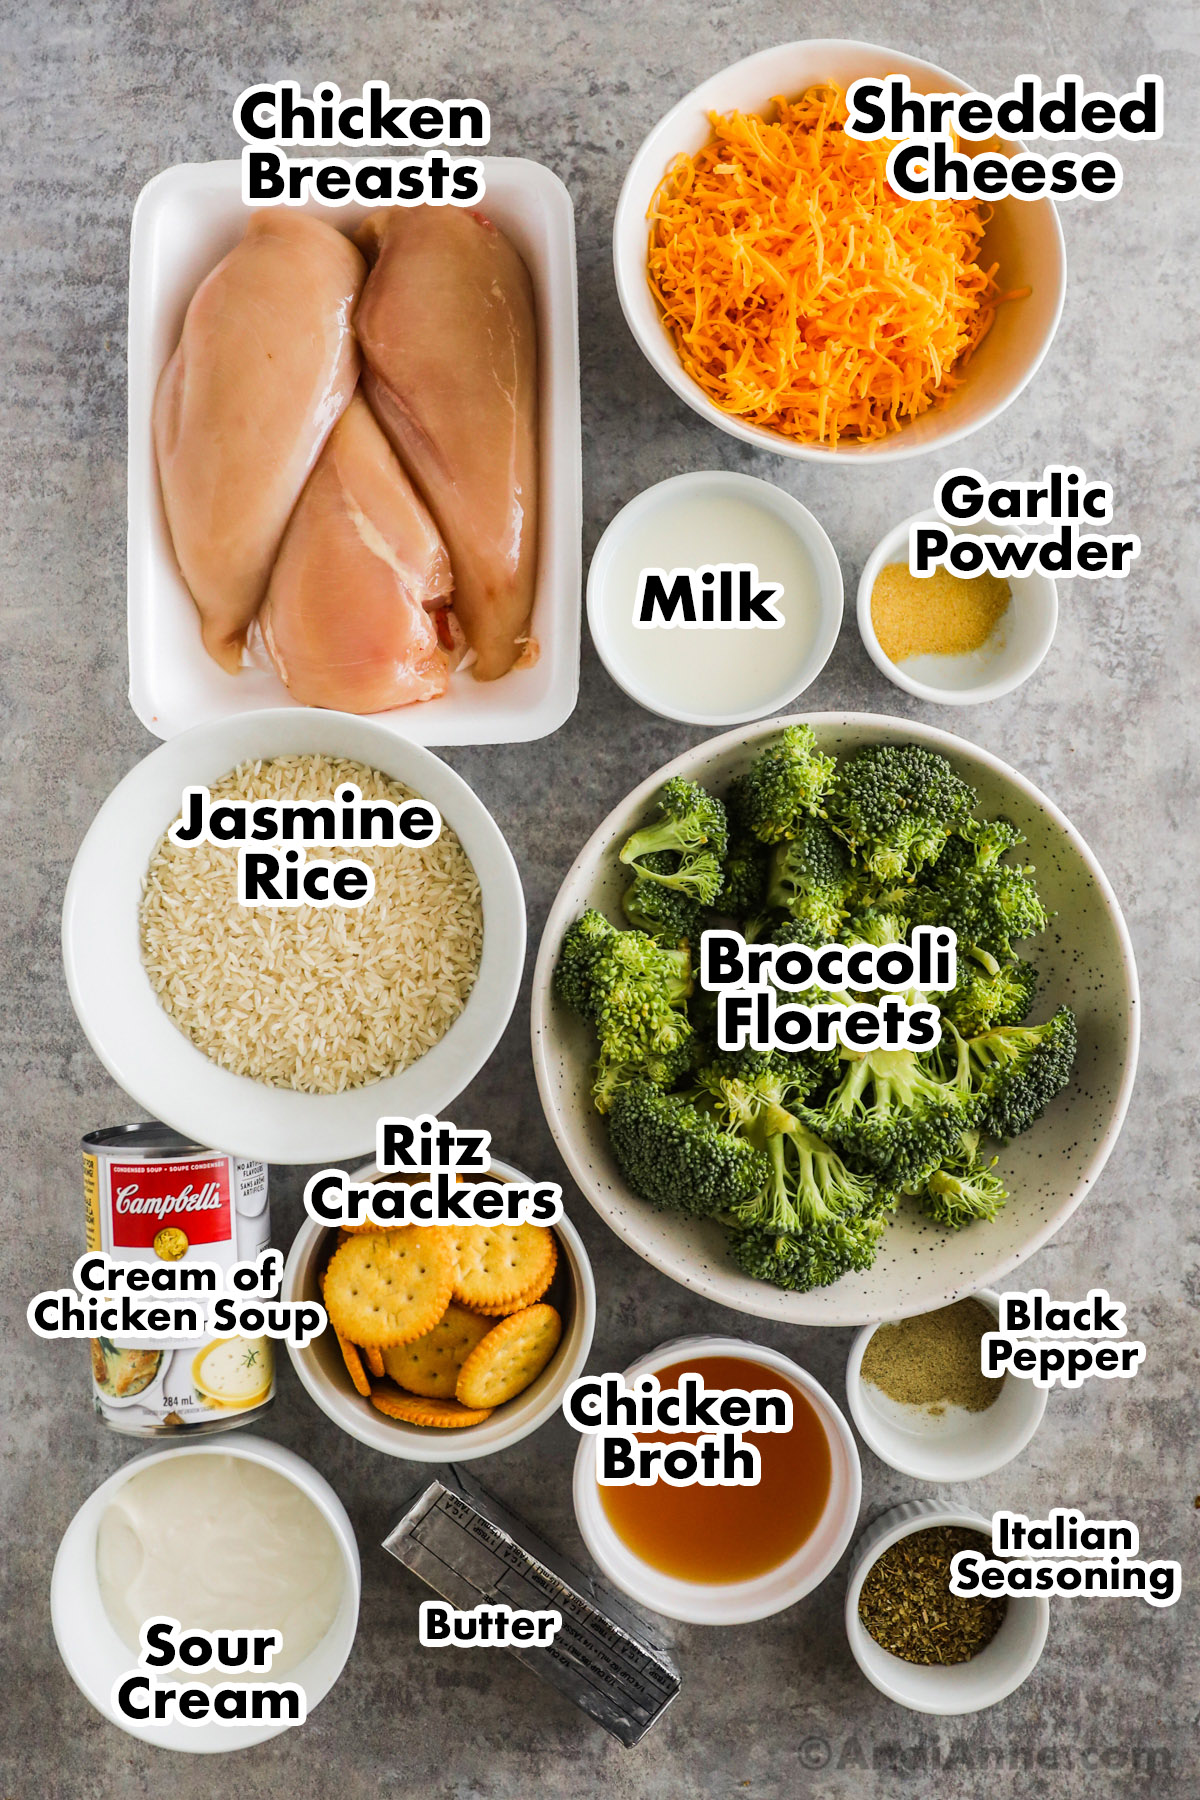 Recipe ingredients on counter. A dish of three raw chicken breasts, and bowls of shredded cheese, milk, garlic powder, jasmine rice, broccoli florets, ritz crackers ,chicken broth, sour cream, italian seasoning and can of cream of chicken soup.